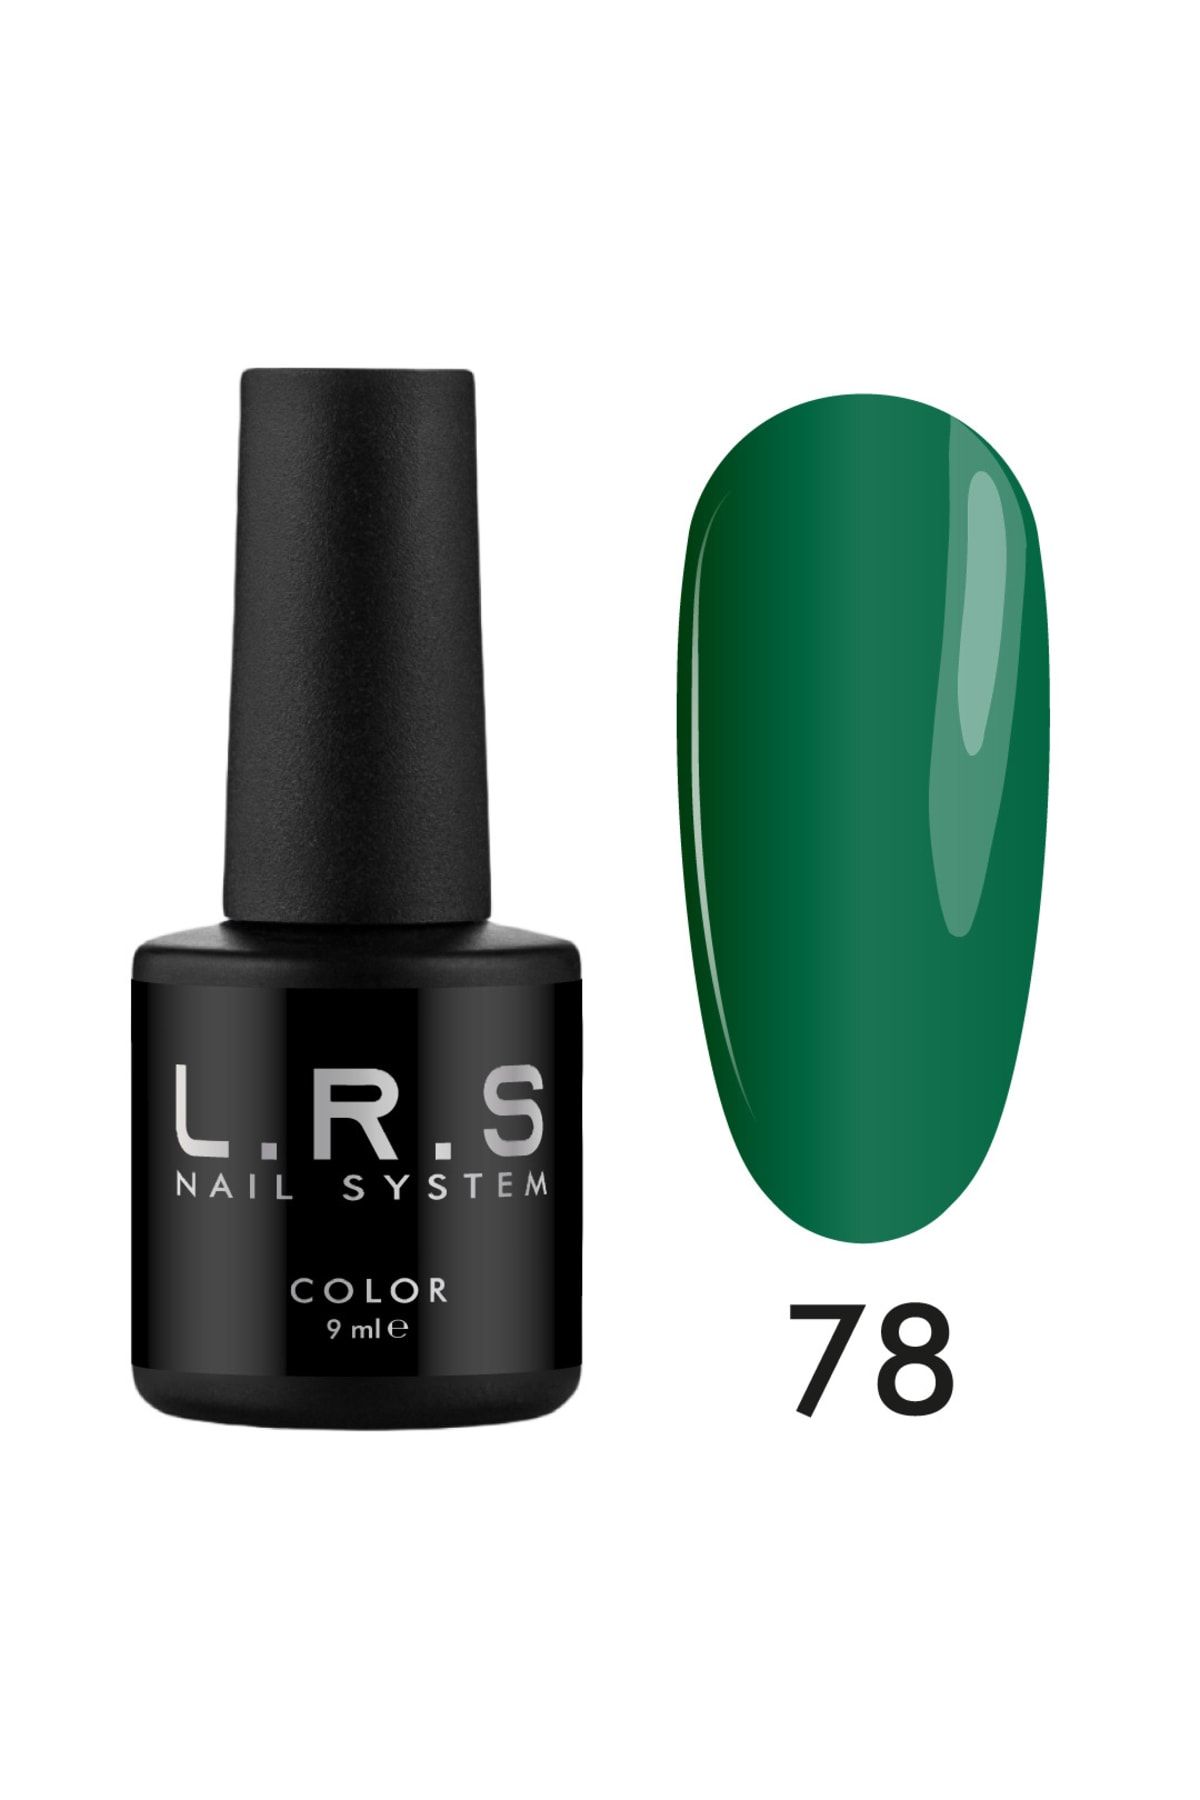 PNB Lrs Nail System 9ml Color 78